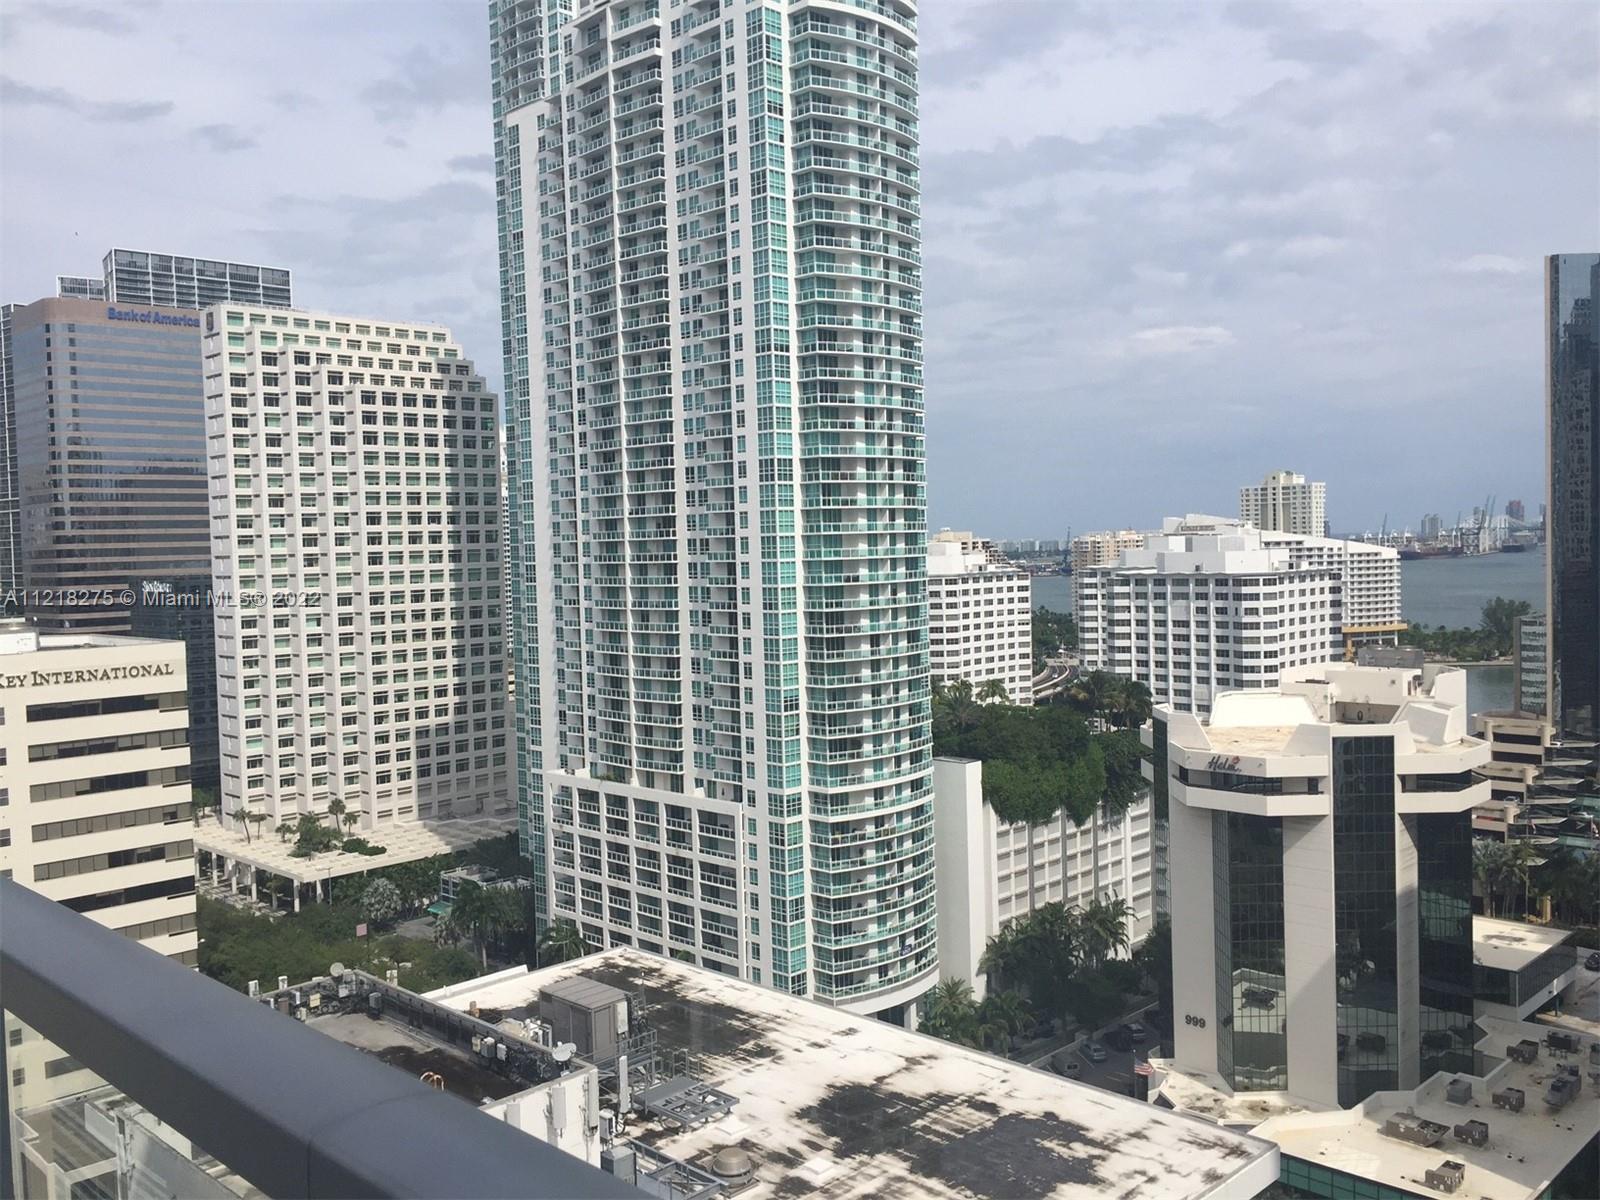 Spectacular 1 bedroom corner unit facing East in the heart of Brickell. Unit features: wrap around balcony, tile floors, granite counter tops and Italian style kitchen, stainless steel appliances, walk-in closest and much more! Building offers great amenities and walking distance to Brickell City Center Mall, a variety of restaurants, commercial area, supermarkets, upcoming Miami Beach centre and fifteen minutes away from the airport. Building is over Brickell Avenue and has dual entrance.